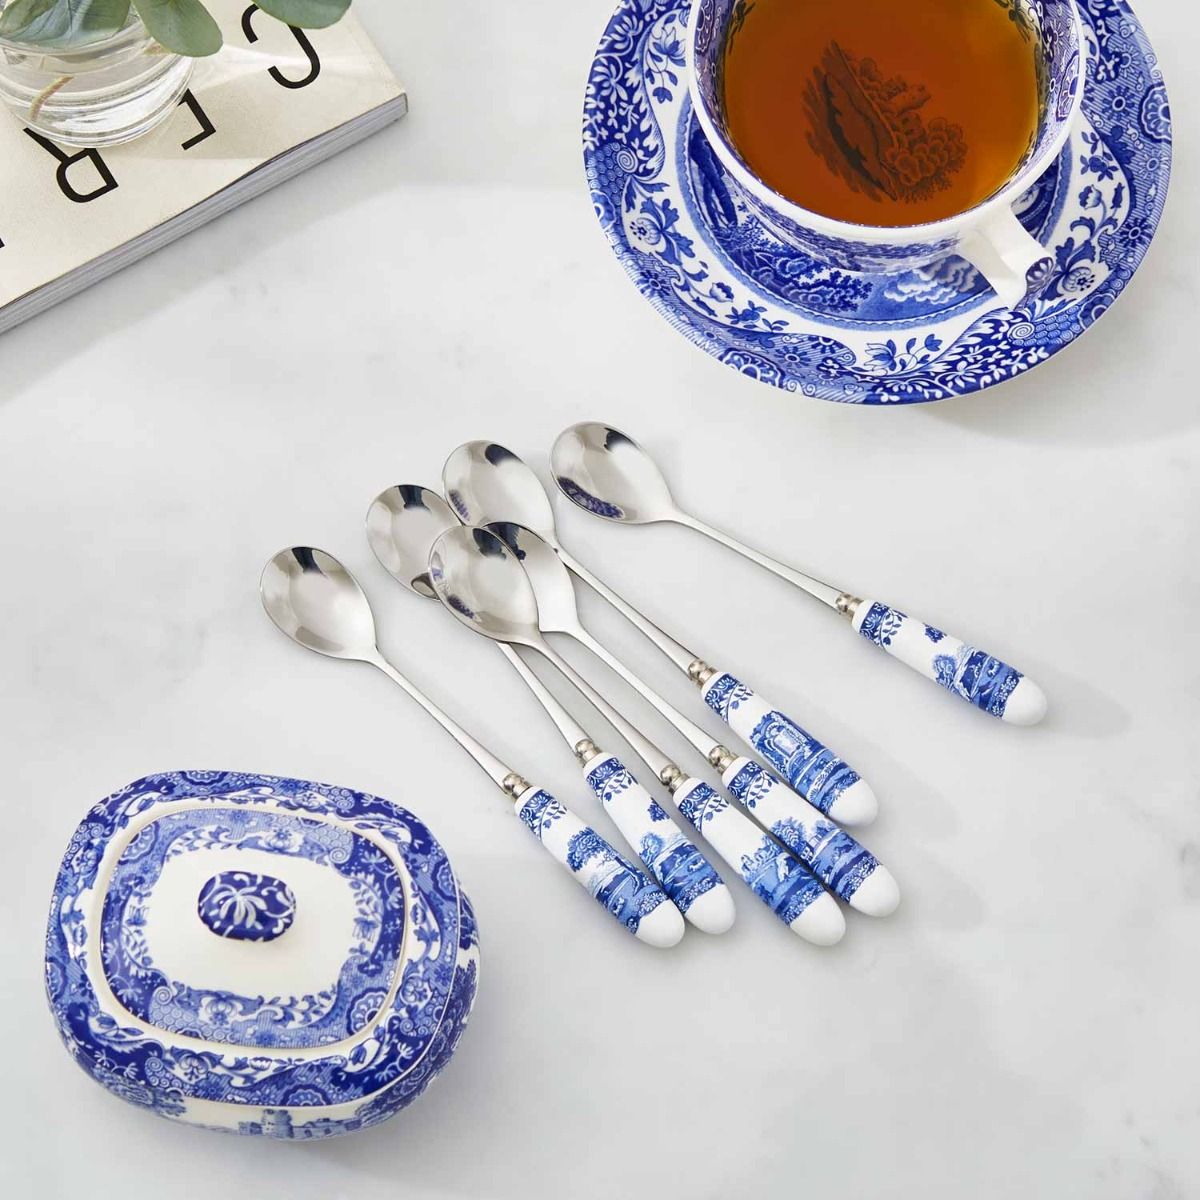 Spode Blue Italian Stainless Steel Teaspoons with Porcelain Handles Set of 6 